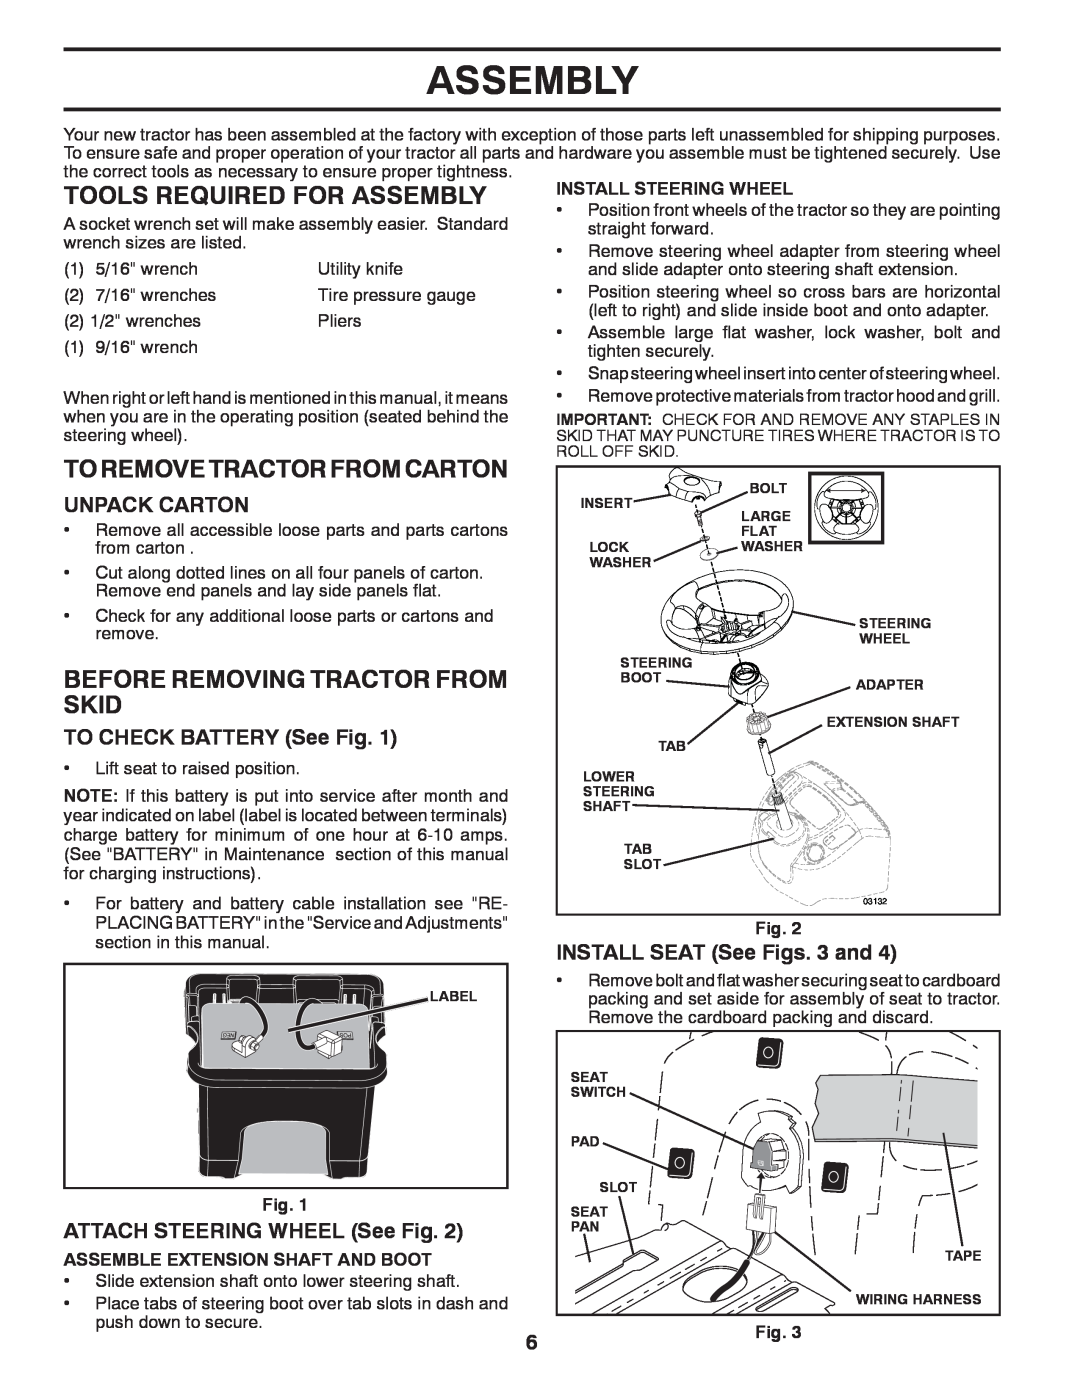 Poulan 430094 manual Tools Required For Assembly, To Remove Tractor From Carton, Before Removing Tractor From Skid 